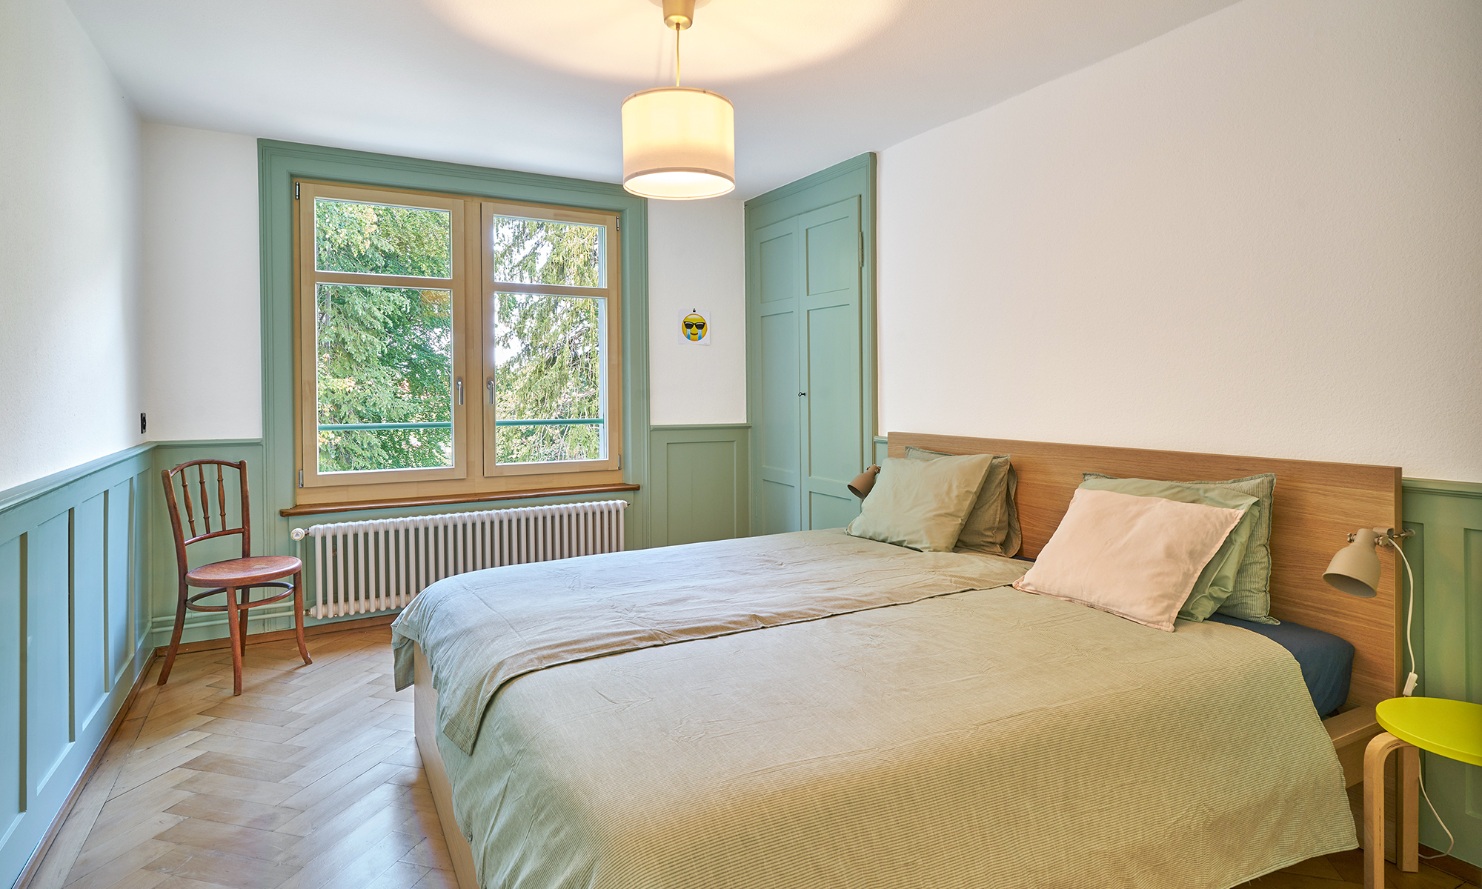 Bedroom with wooden floor and light-green accenting features